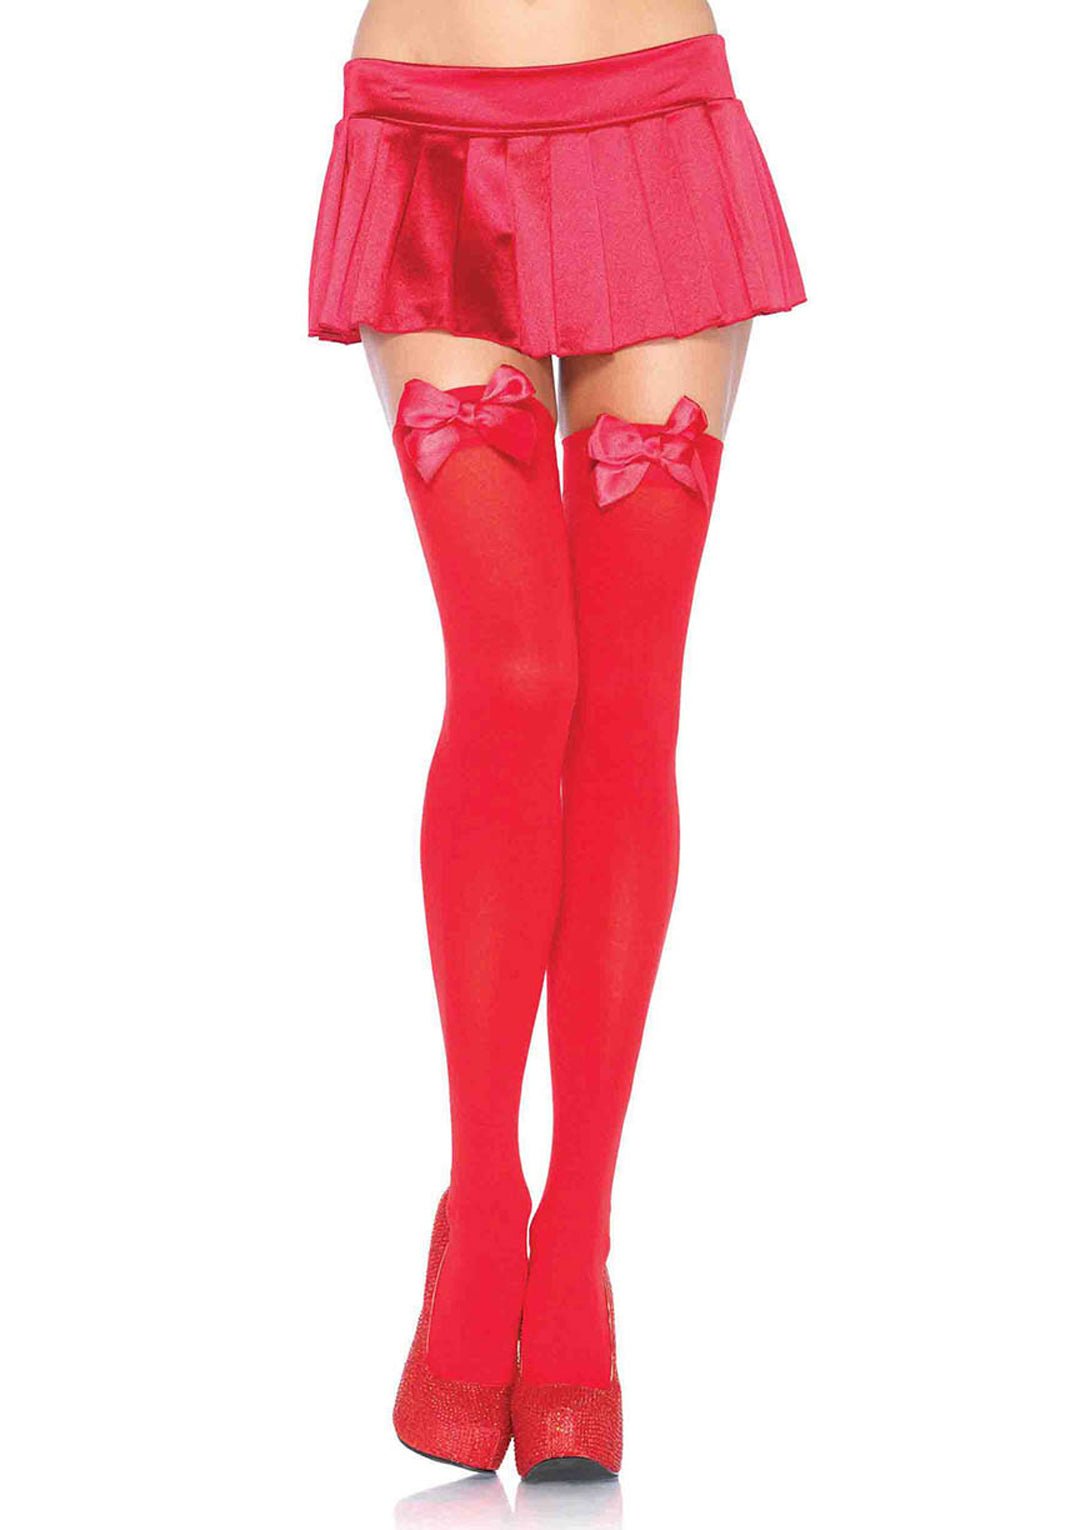 Thigh High Stockings with Bows - JJ's Party House